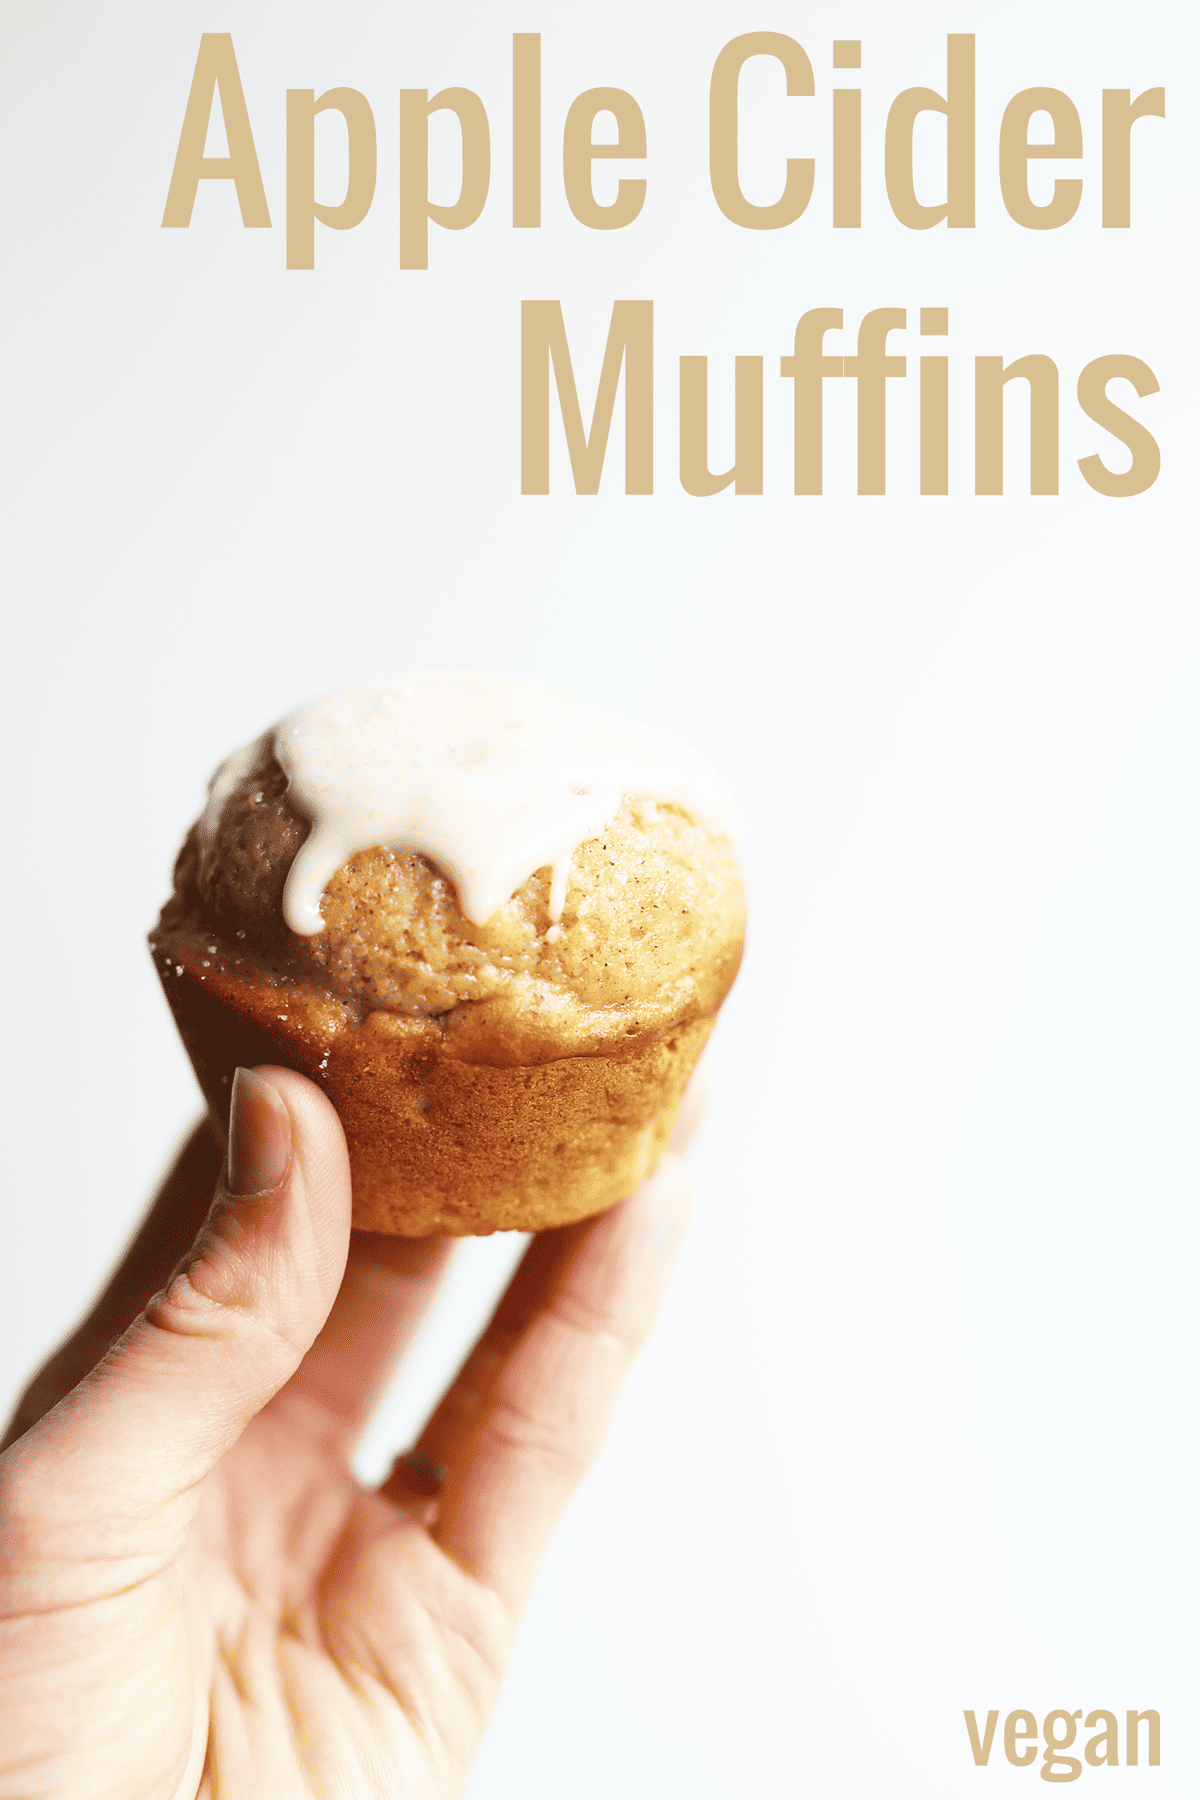 These homemade Apple Cider Muffins are super easy and yum! Soft and moist inside with a sweet glaze on the top! Vegan and flavorful.